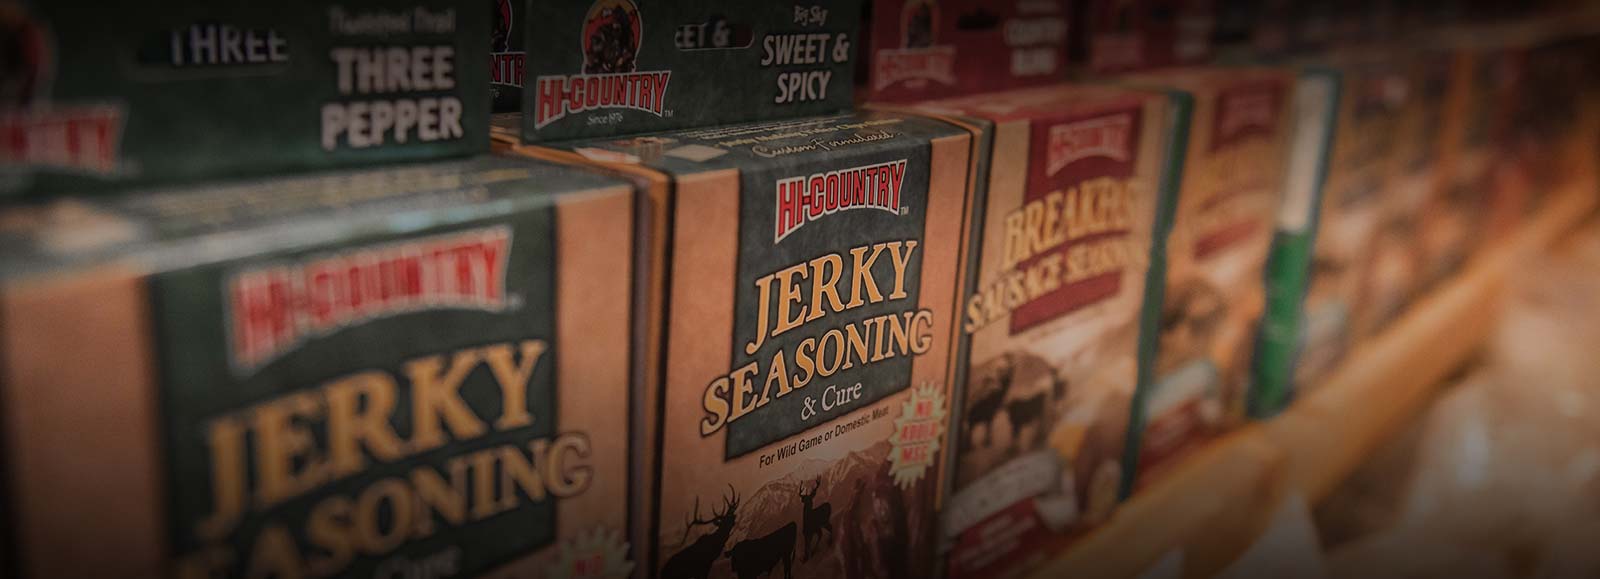 Hi-Country Beef Jerky, Western Style Pepperoni Sticks